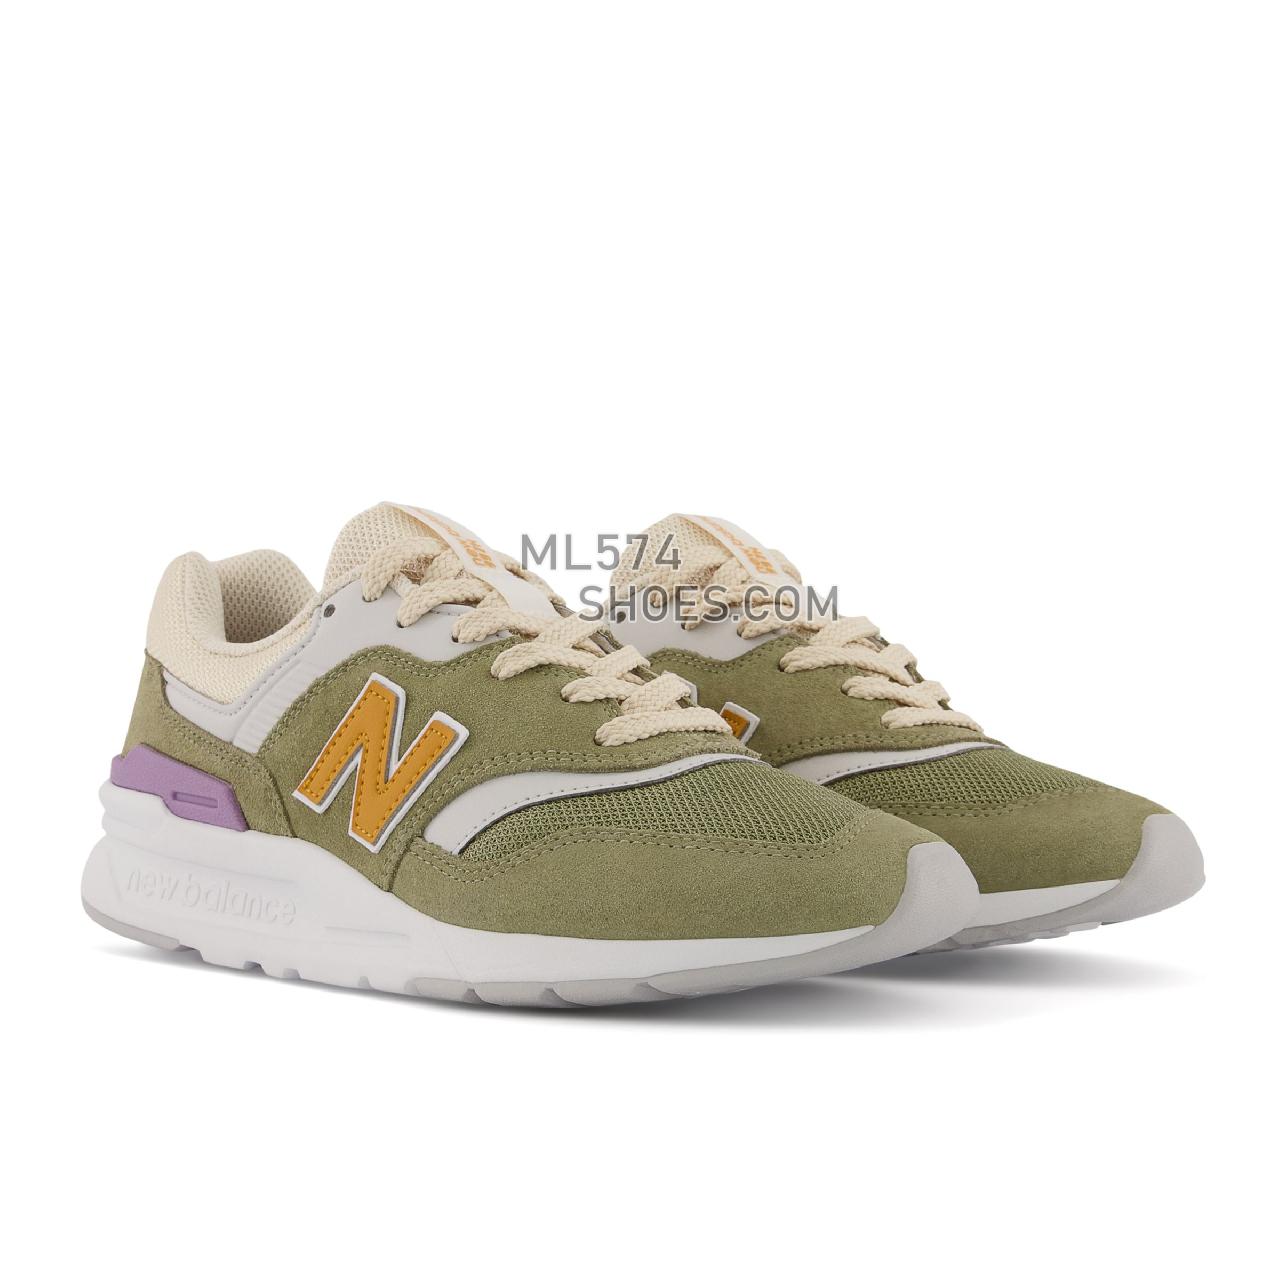 New Balance 997H - Women's Sport Style Sneakers - True Camo with Golden Hour - CW997HSV